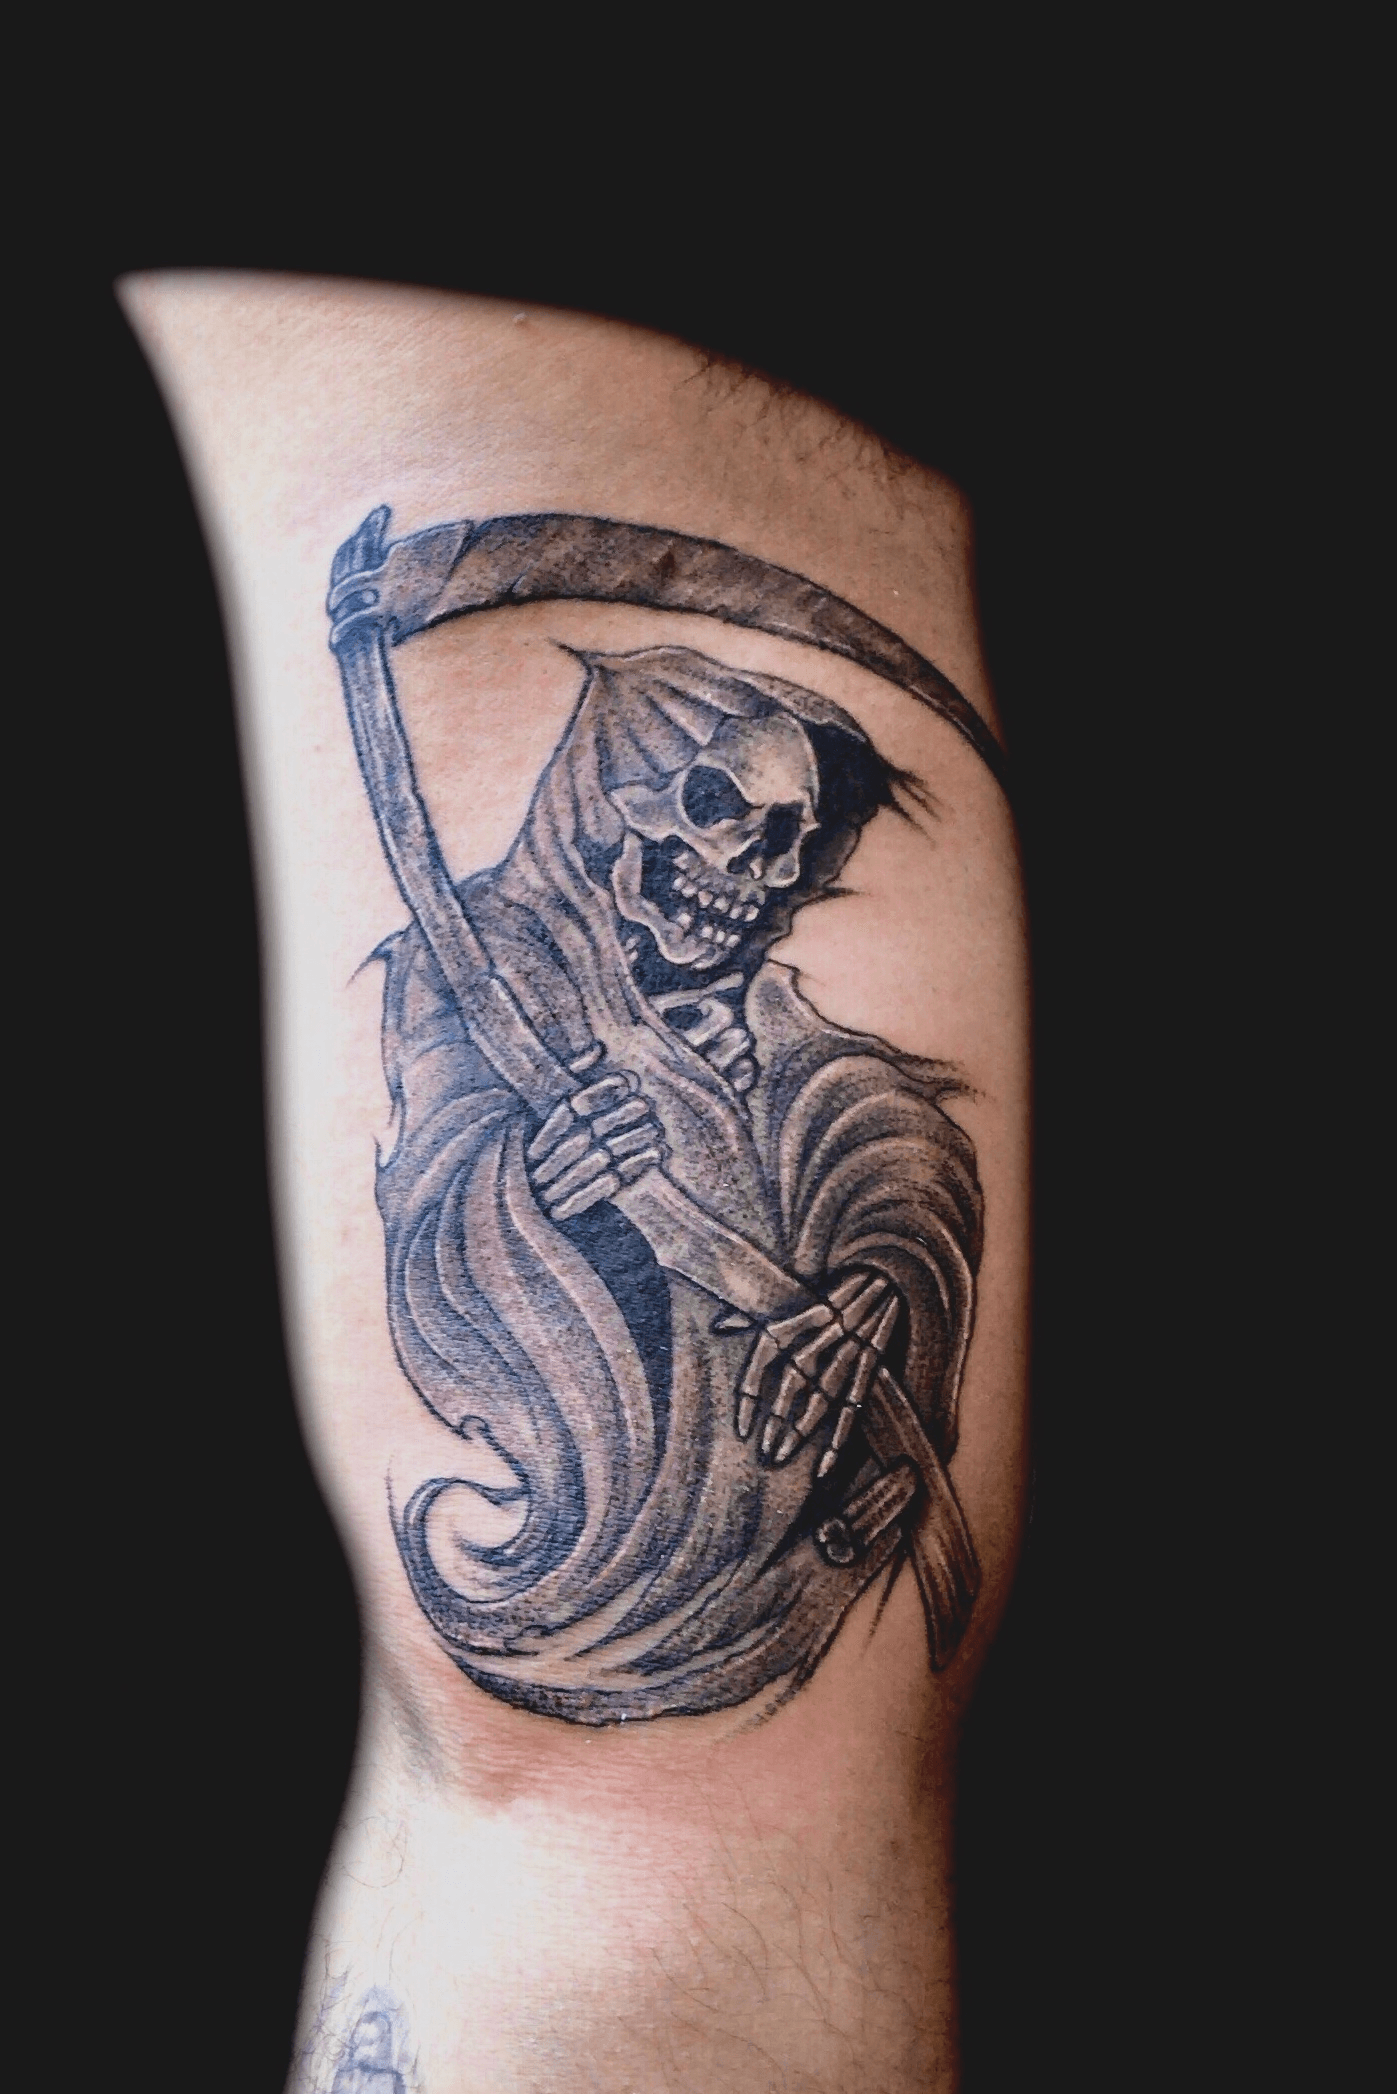 Forearm Reaper done by Jonathan at Grape Ape Tattoo in Tucson  rtattoos